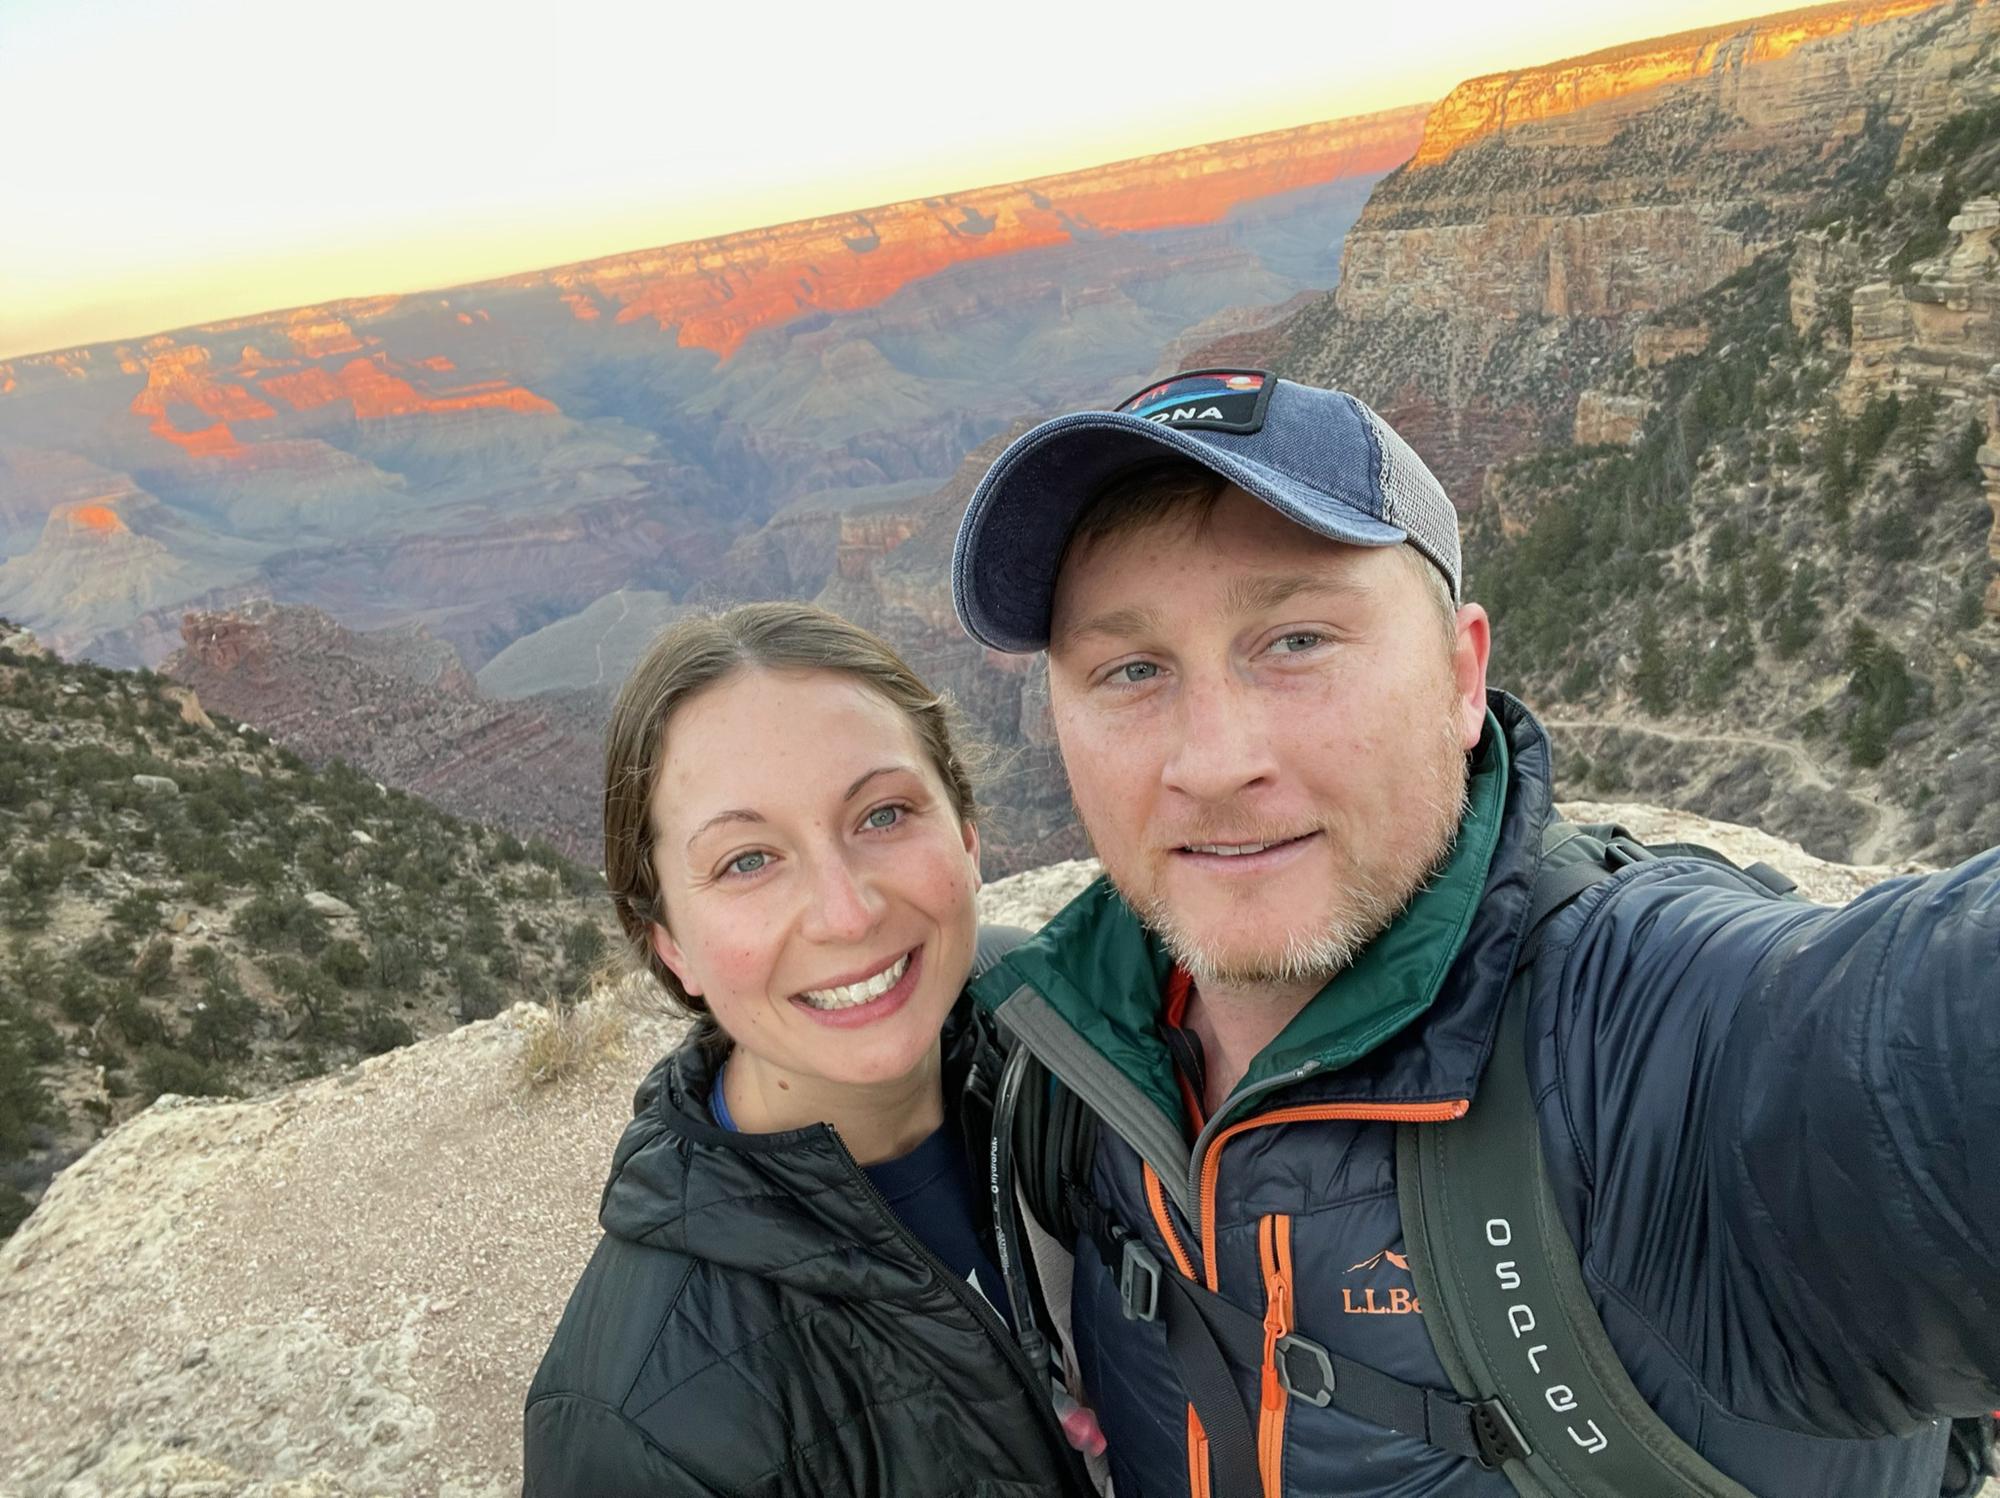 Surprise Grand Canyon trip for Conner’s 30th birthday